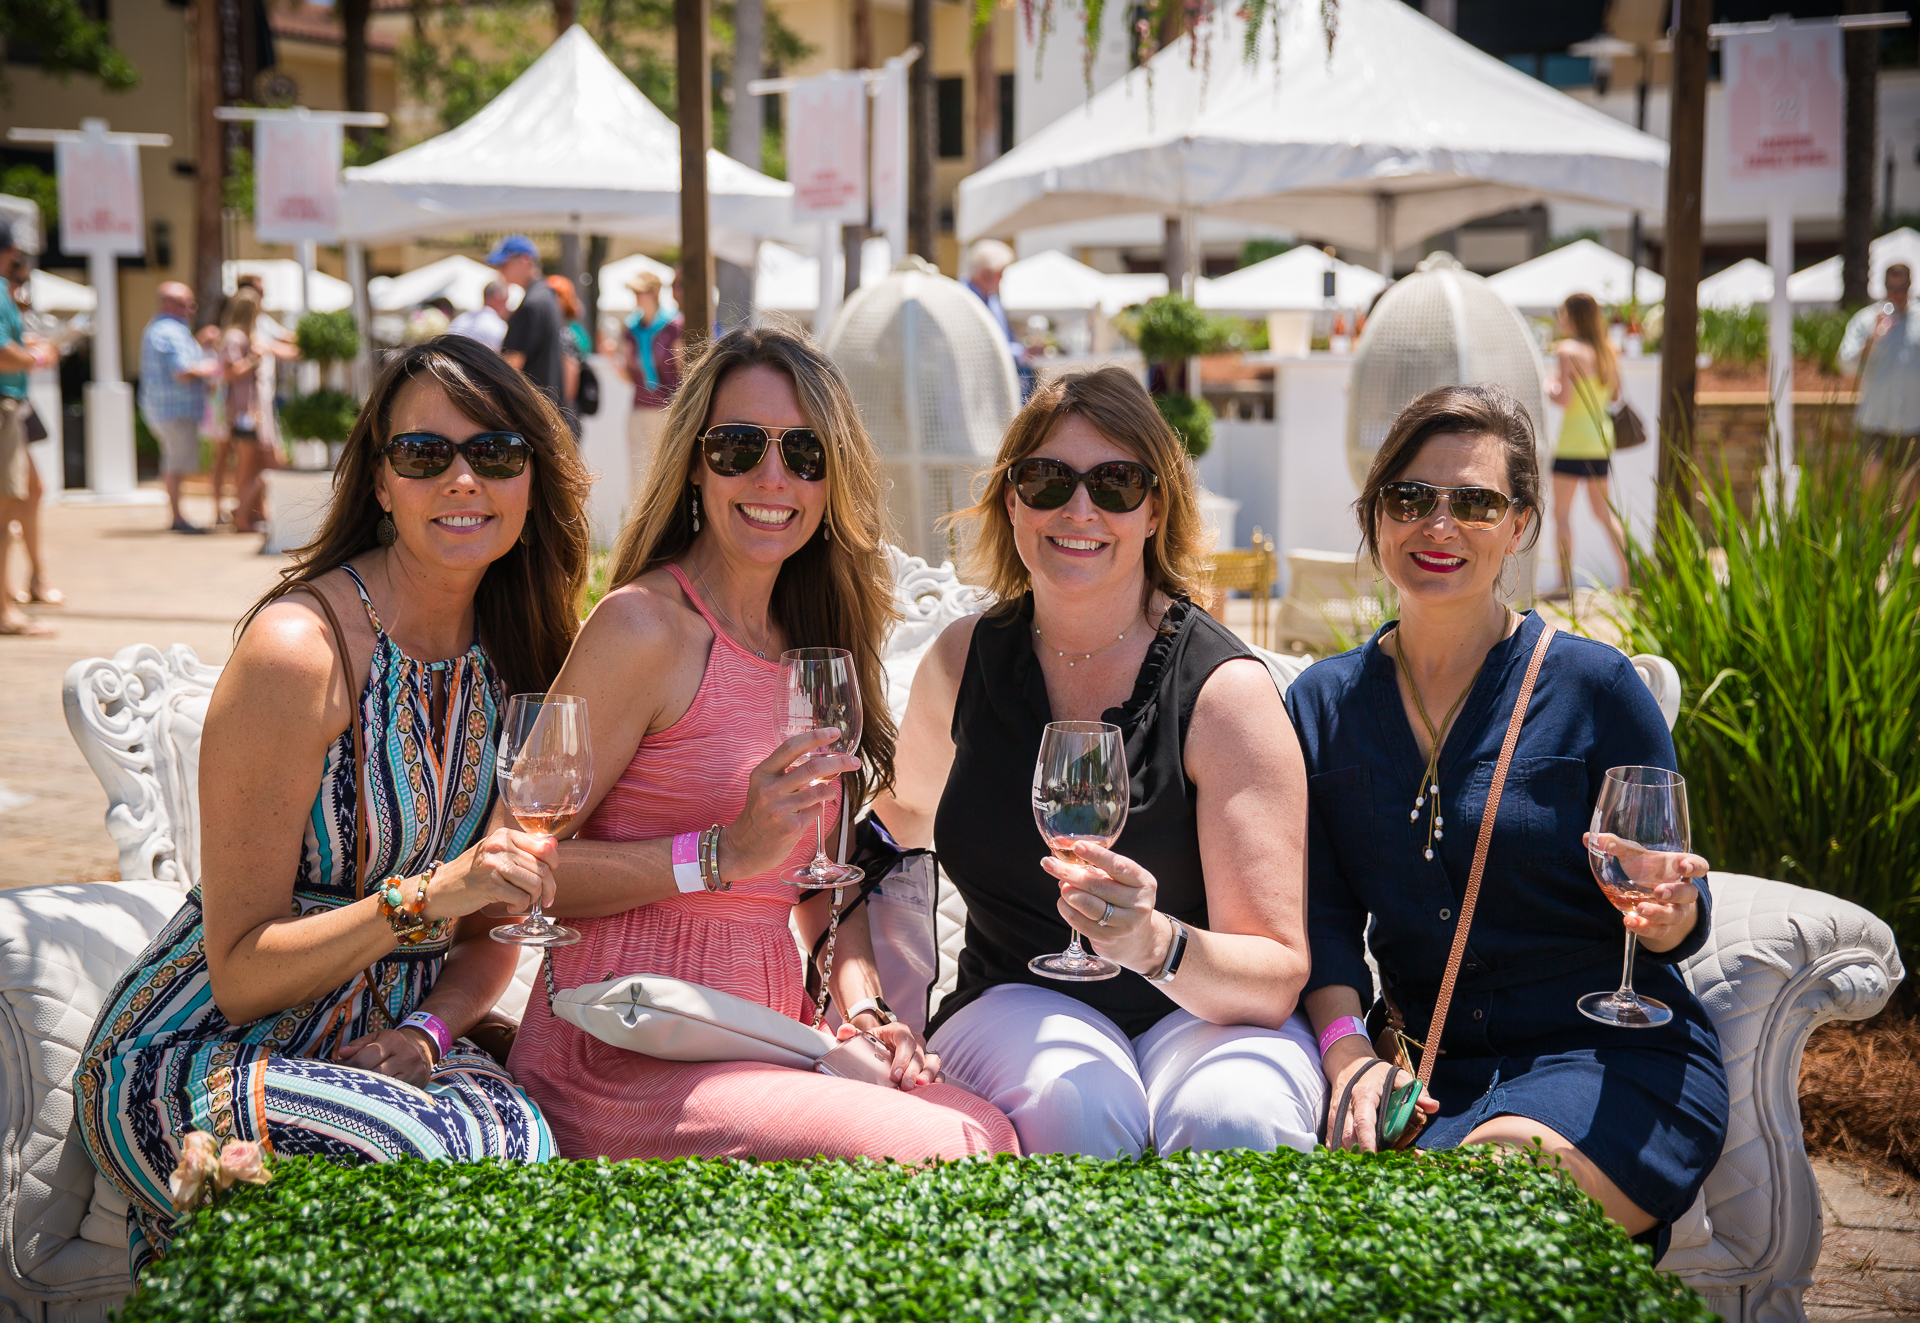 Each year Grand Boulevard becomes the epicenter of the wine world during South Walton Beaches Wine & Food Festival, April 25-28.